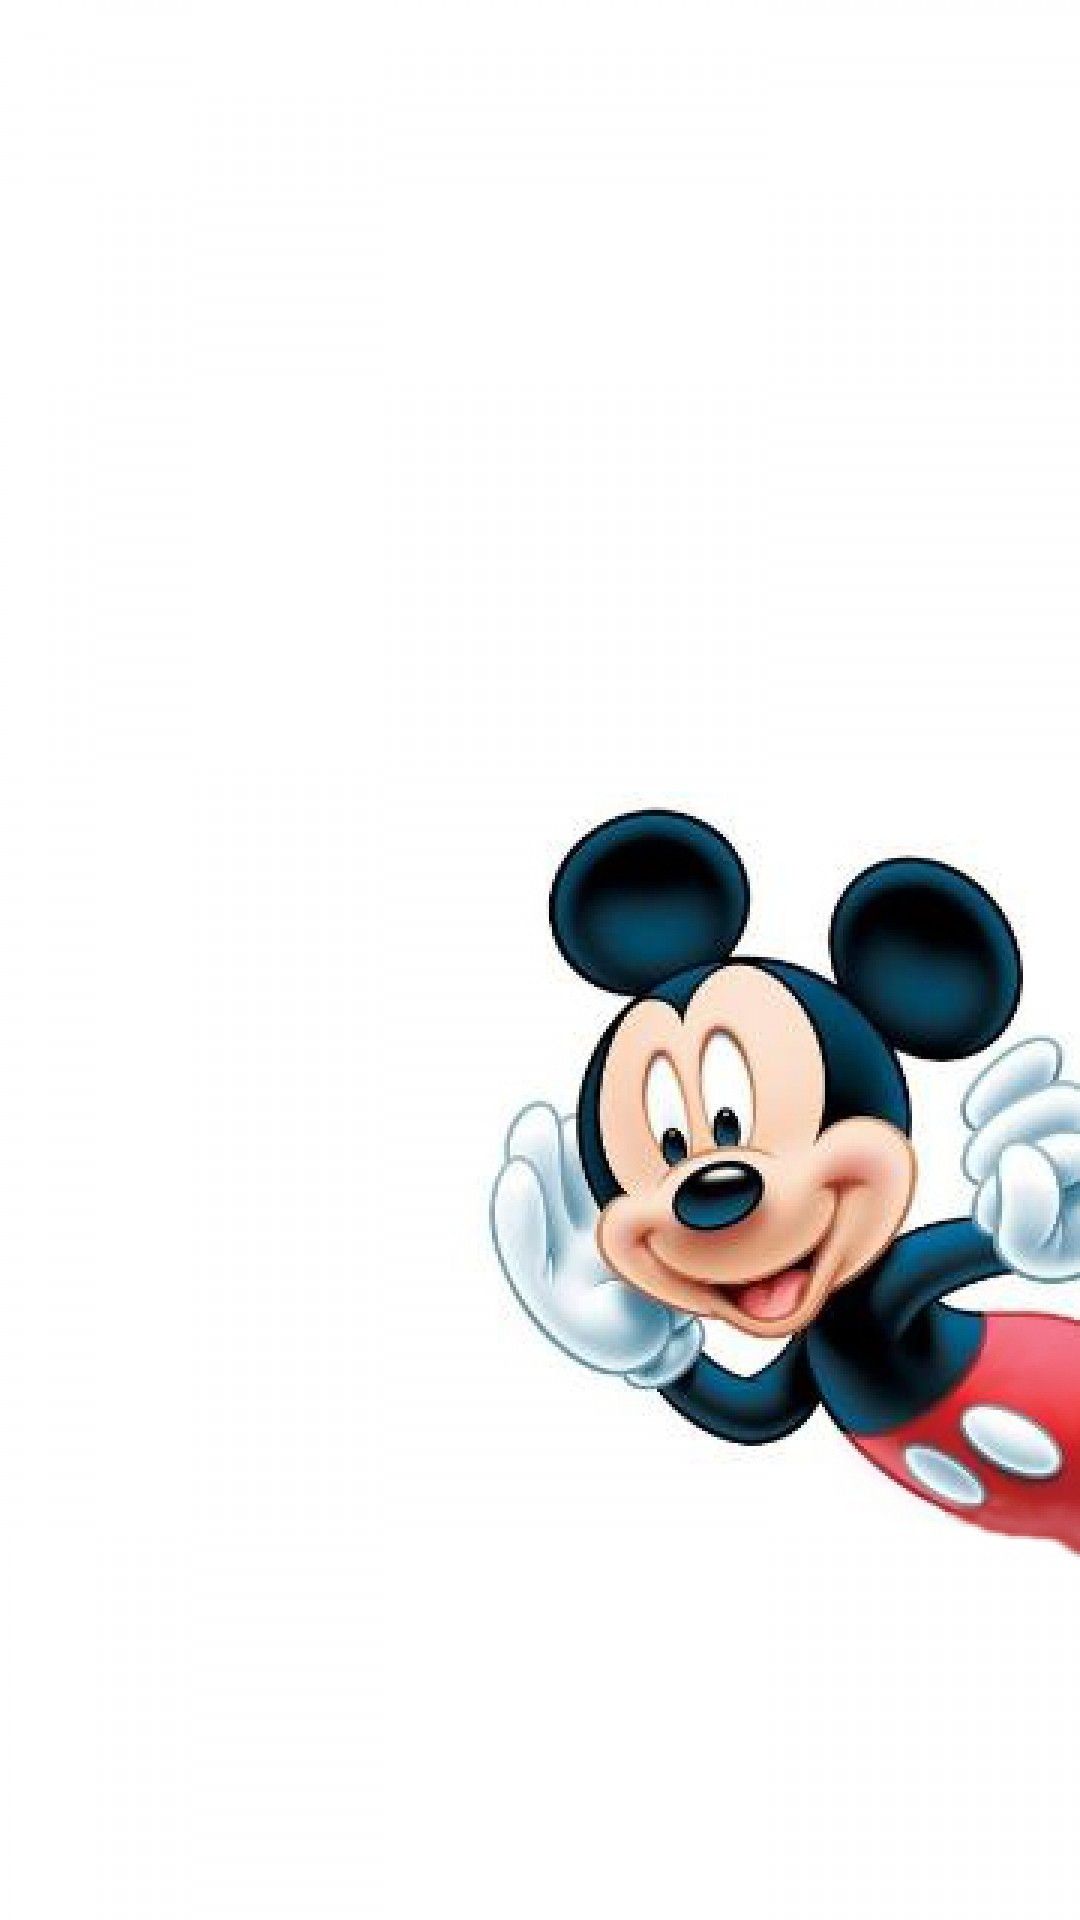 mickey mouse wallpaper for mobile,cartoon,blue,nose,smile,animation